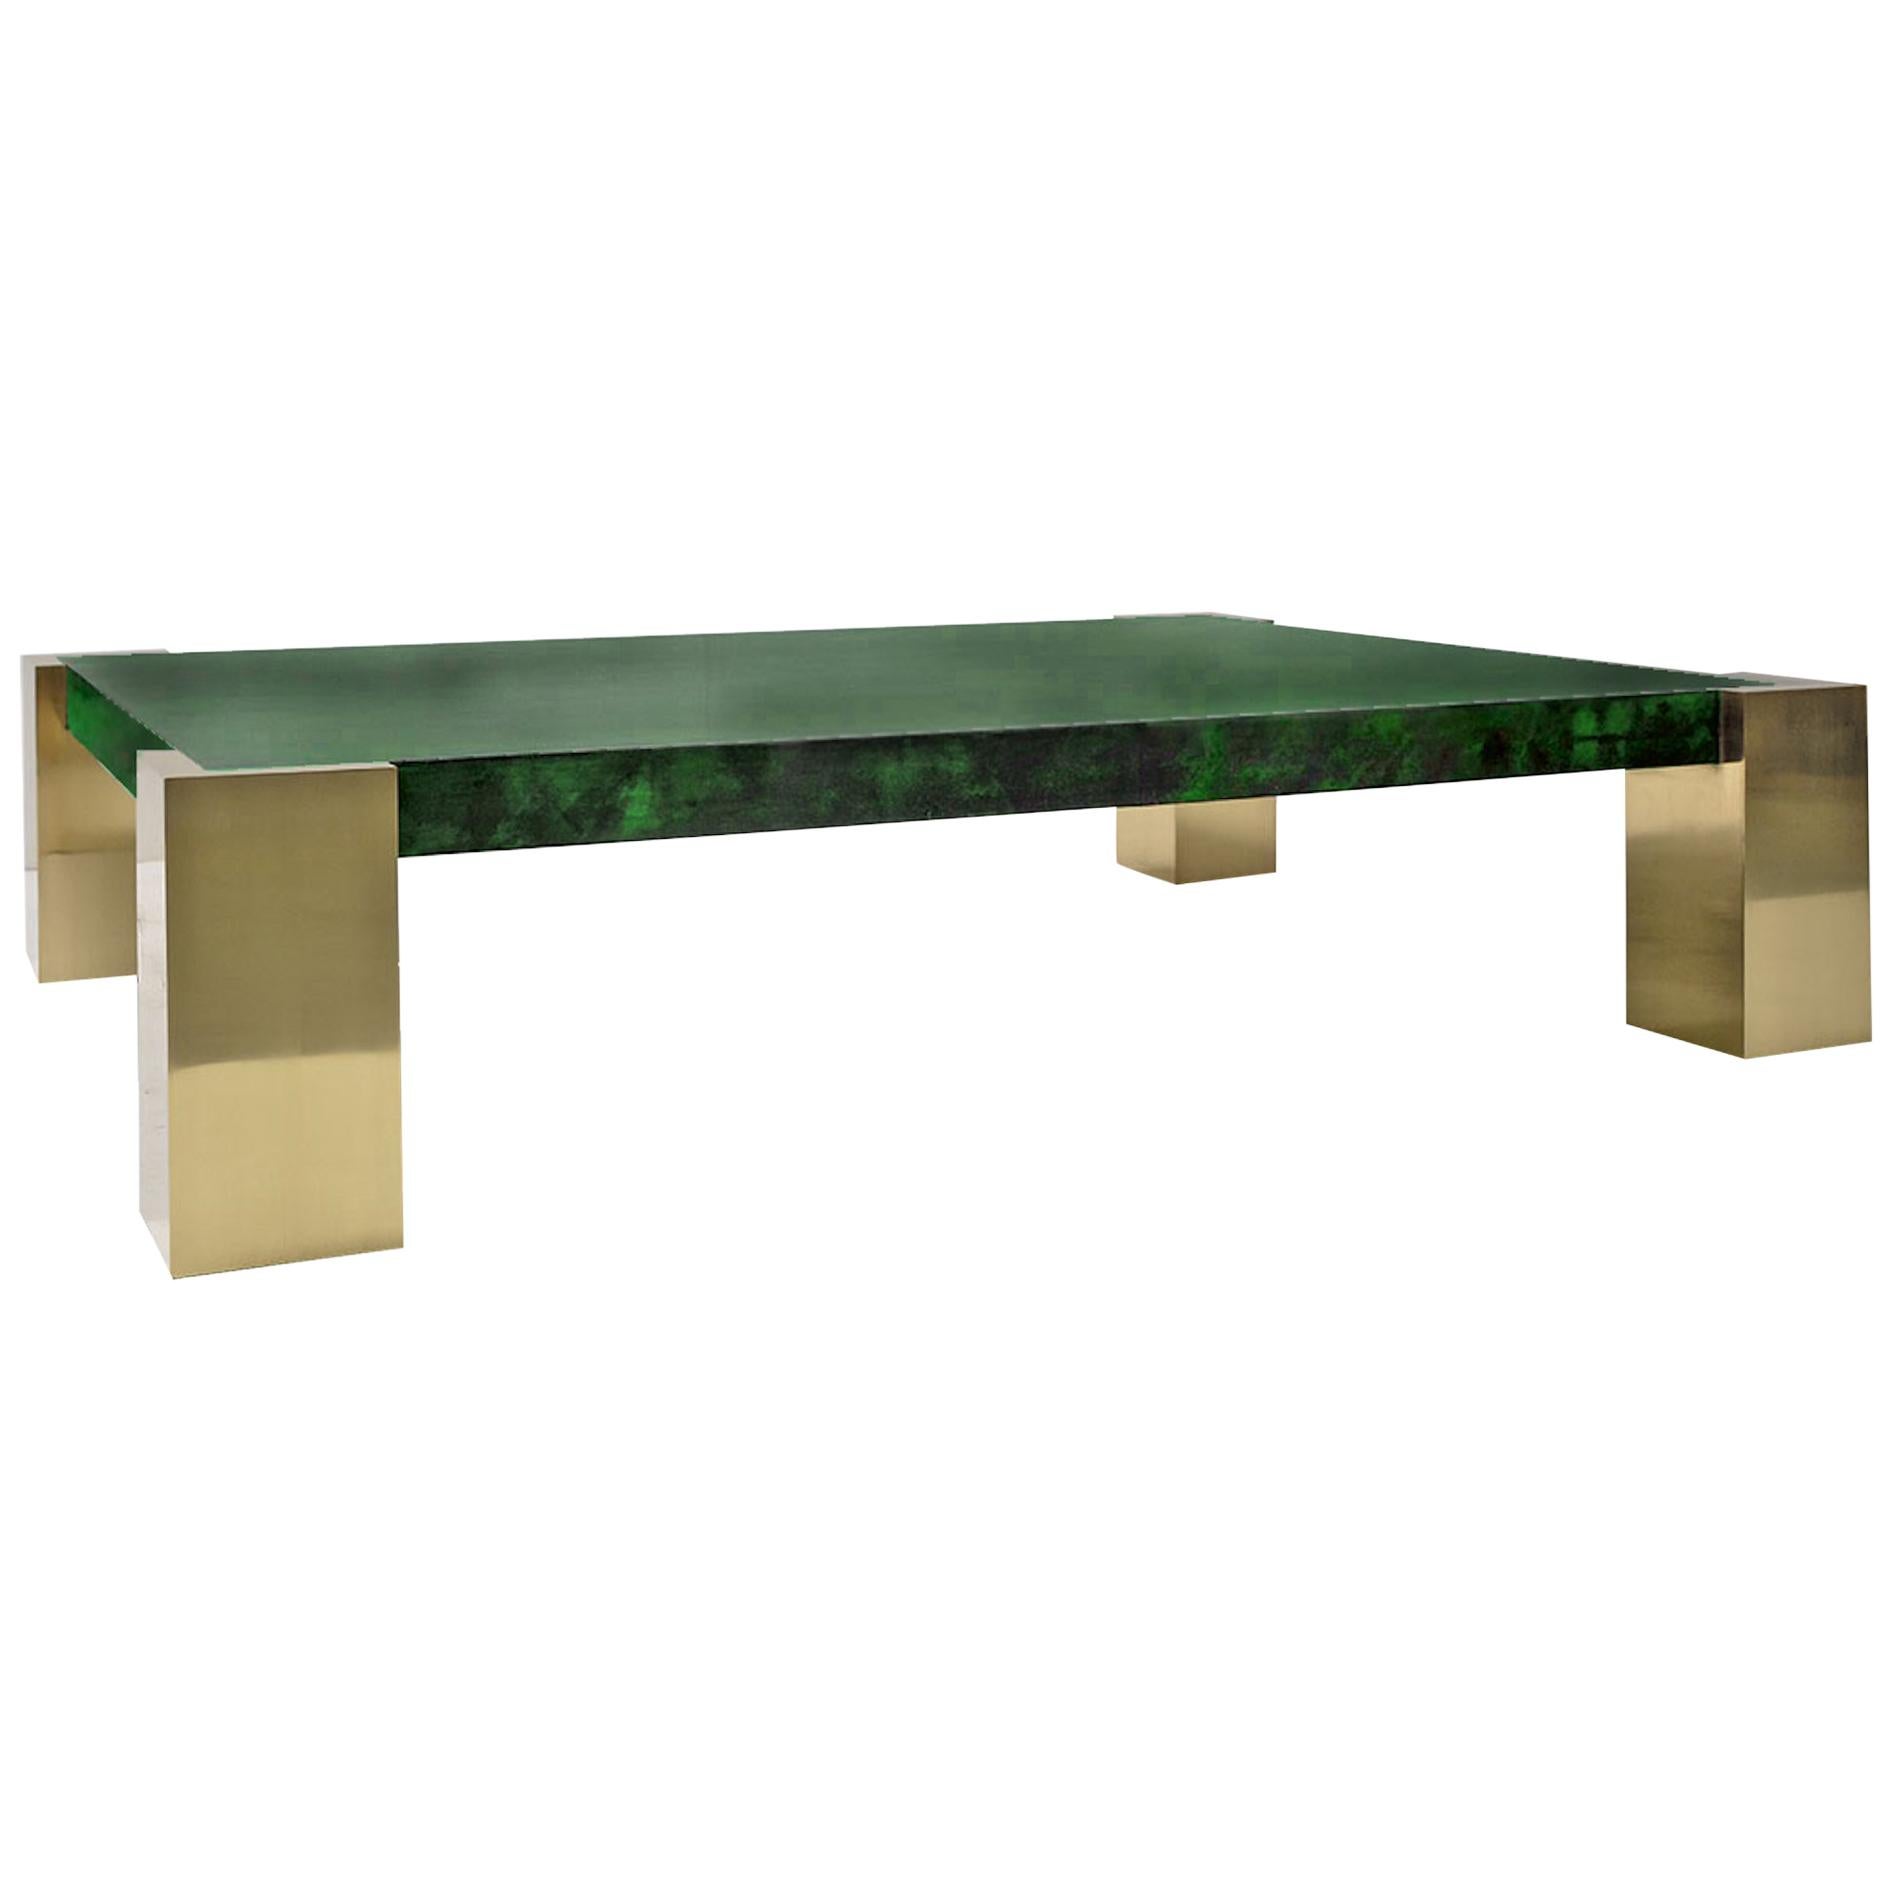 Stunning Art Deco Coffee Table in Emerald Green Parchment Goatskin For Sale